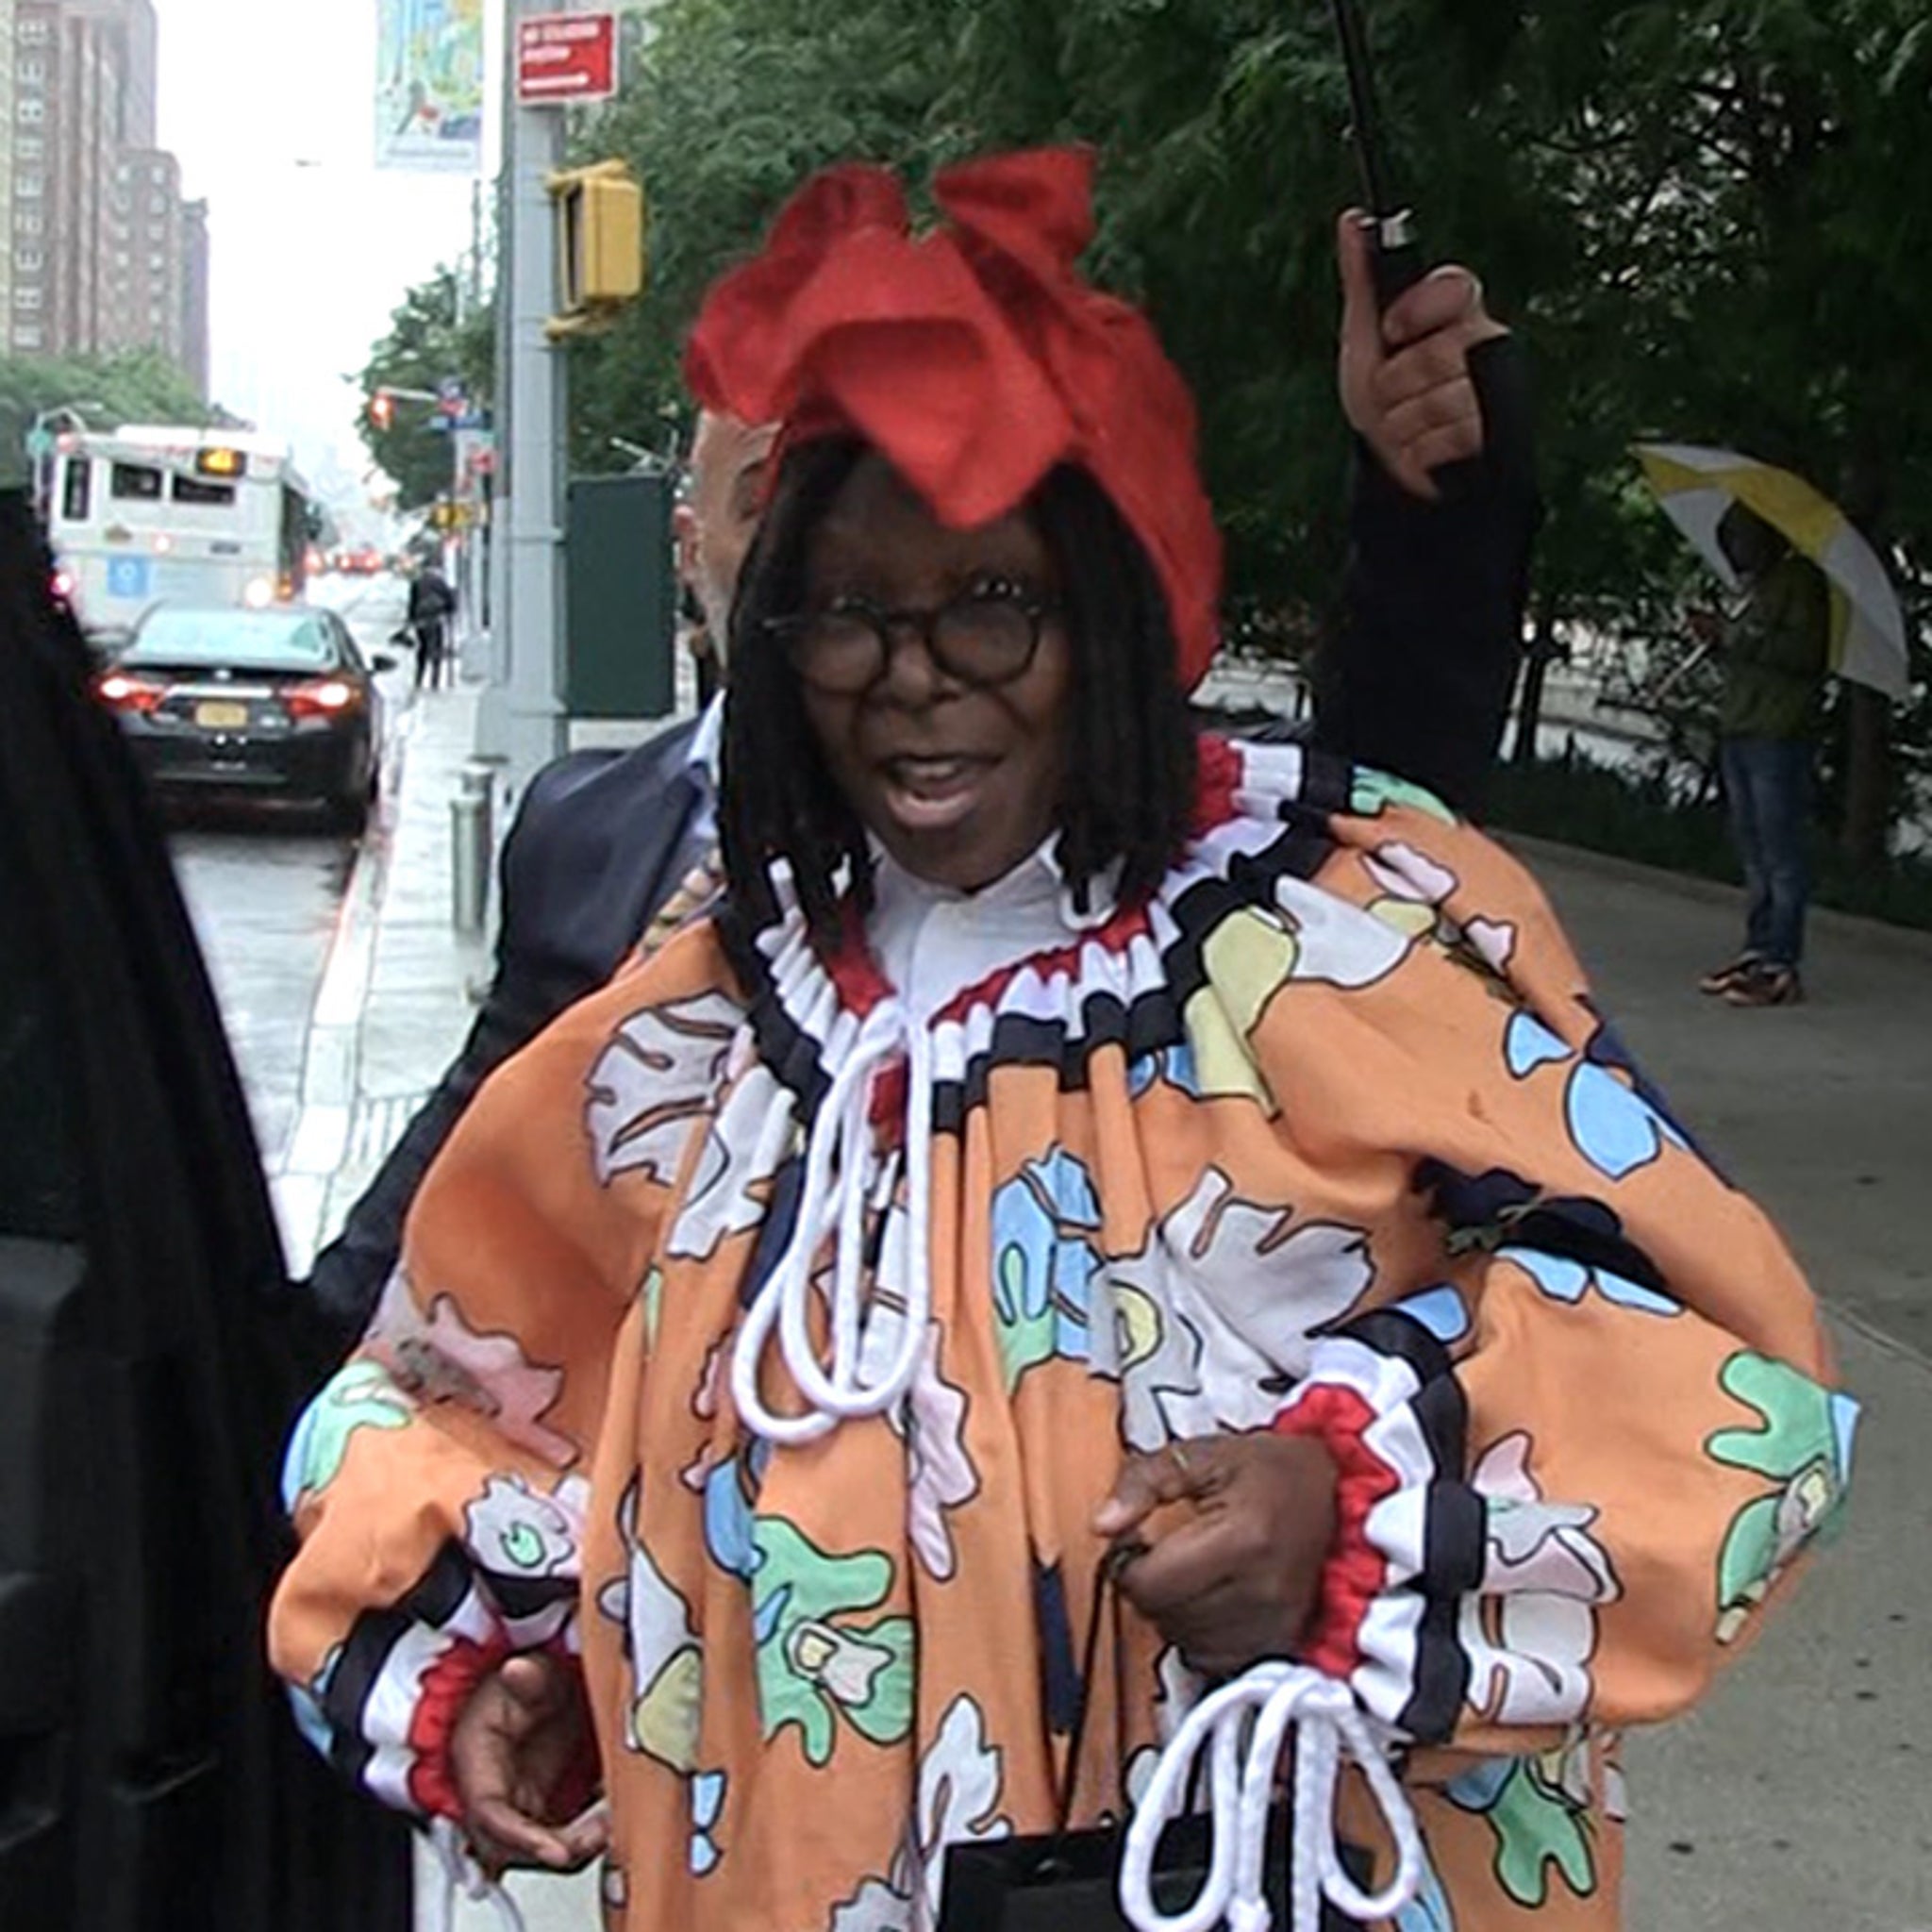 Who is whoopi dating